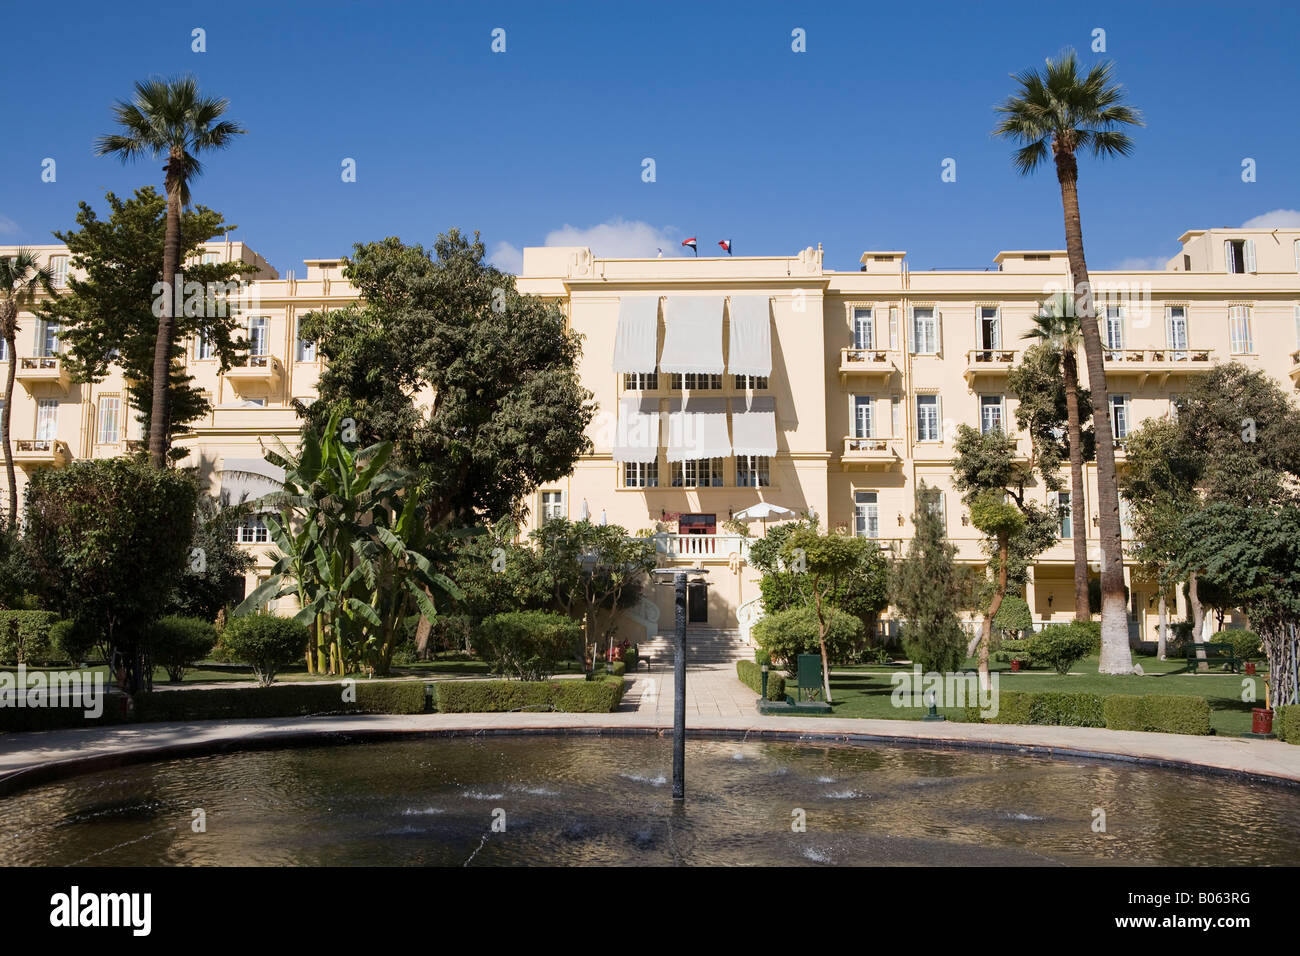 The rear of the Old Winter Palace Hotel as seen from the gardens, Luxor Egypt Stock Photo